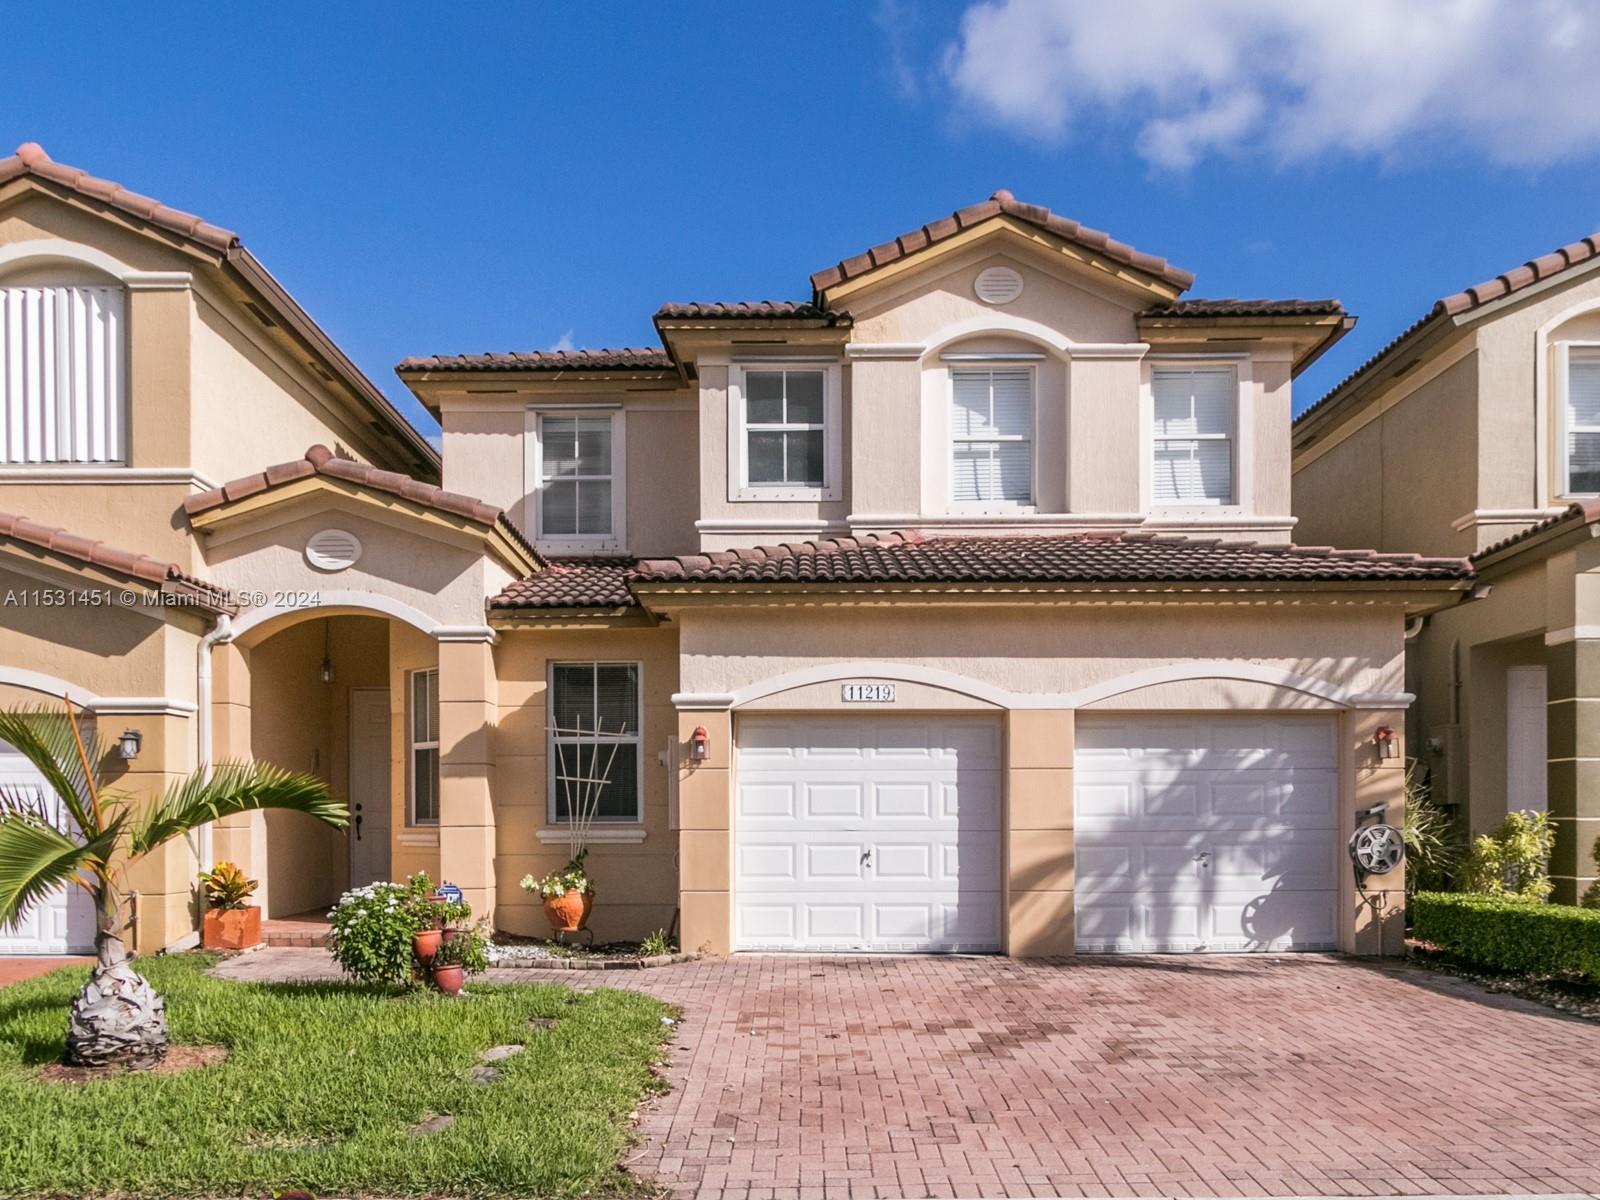 Photo of 11219 NW 74th Ter in Doral, FL